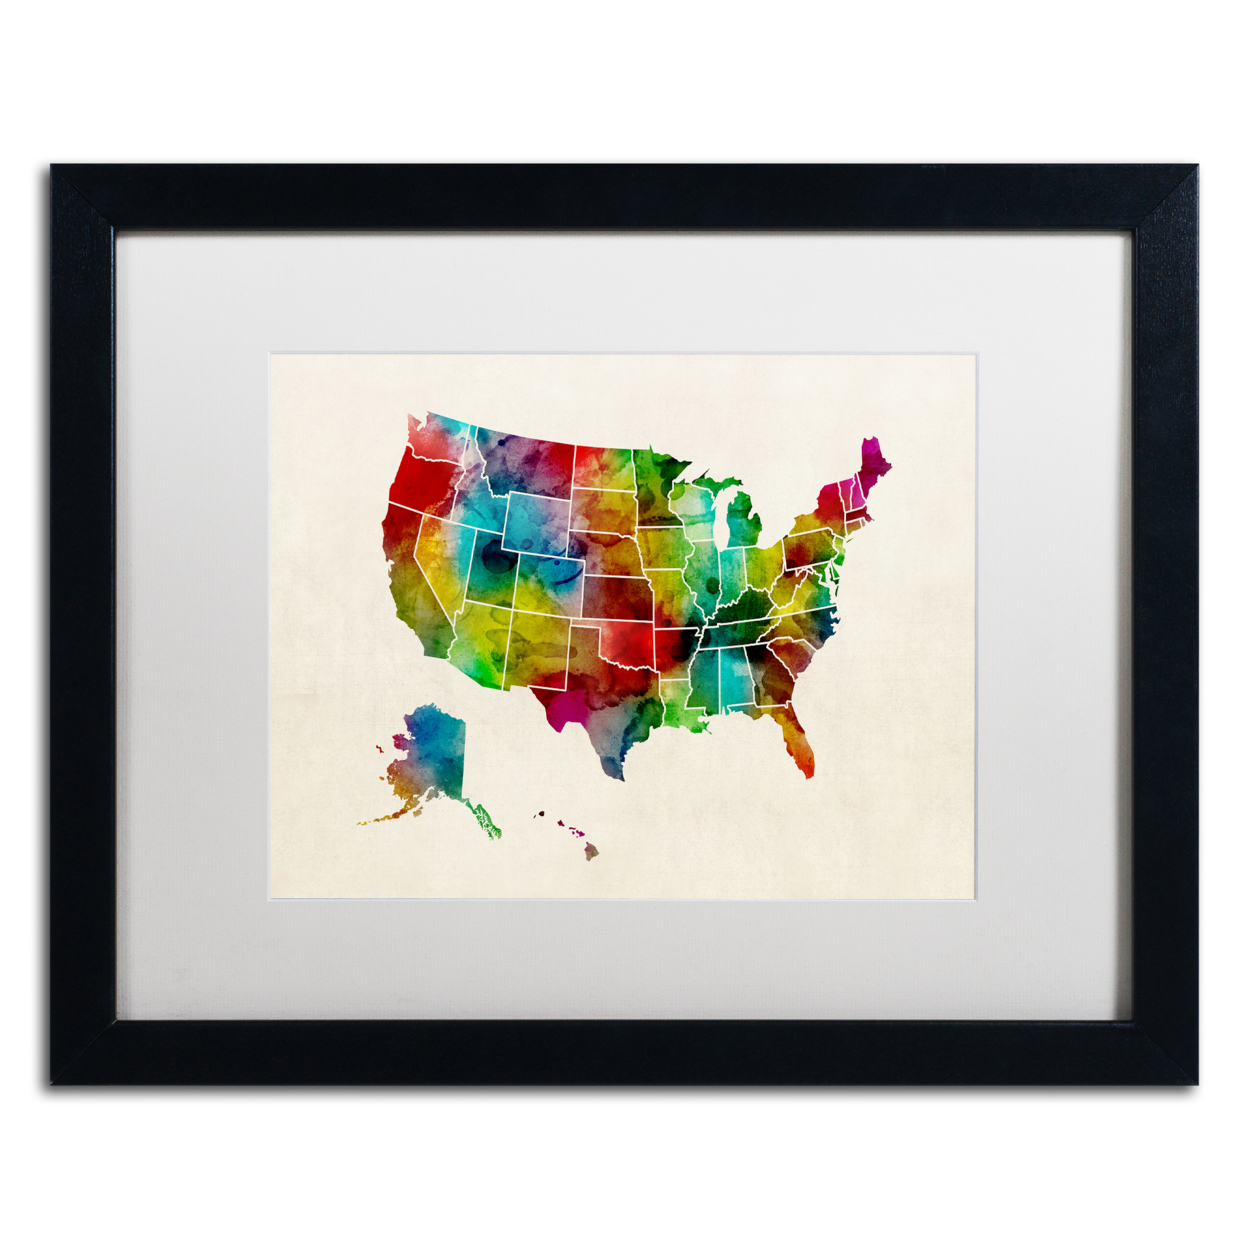 Michael Tompsett 'United States Watercolor Map 2' Black Wooden Framed Art 18 X 22 Inches